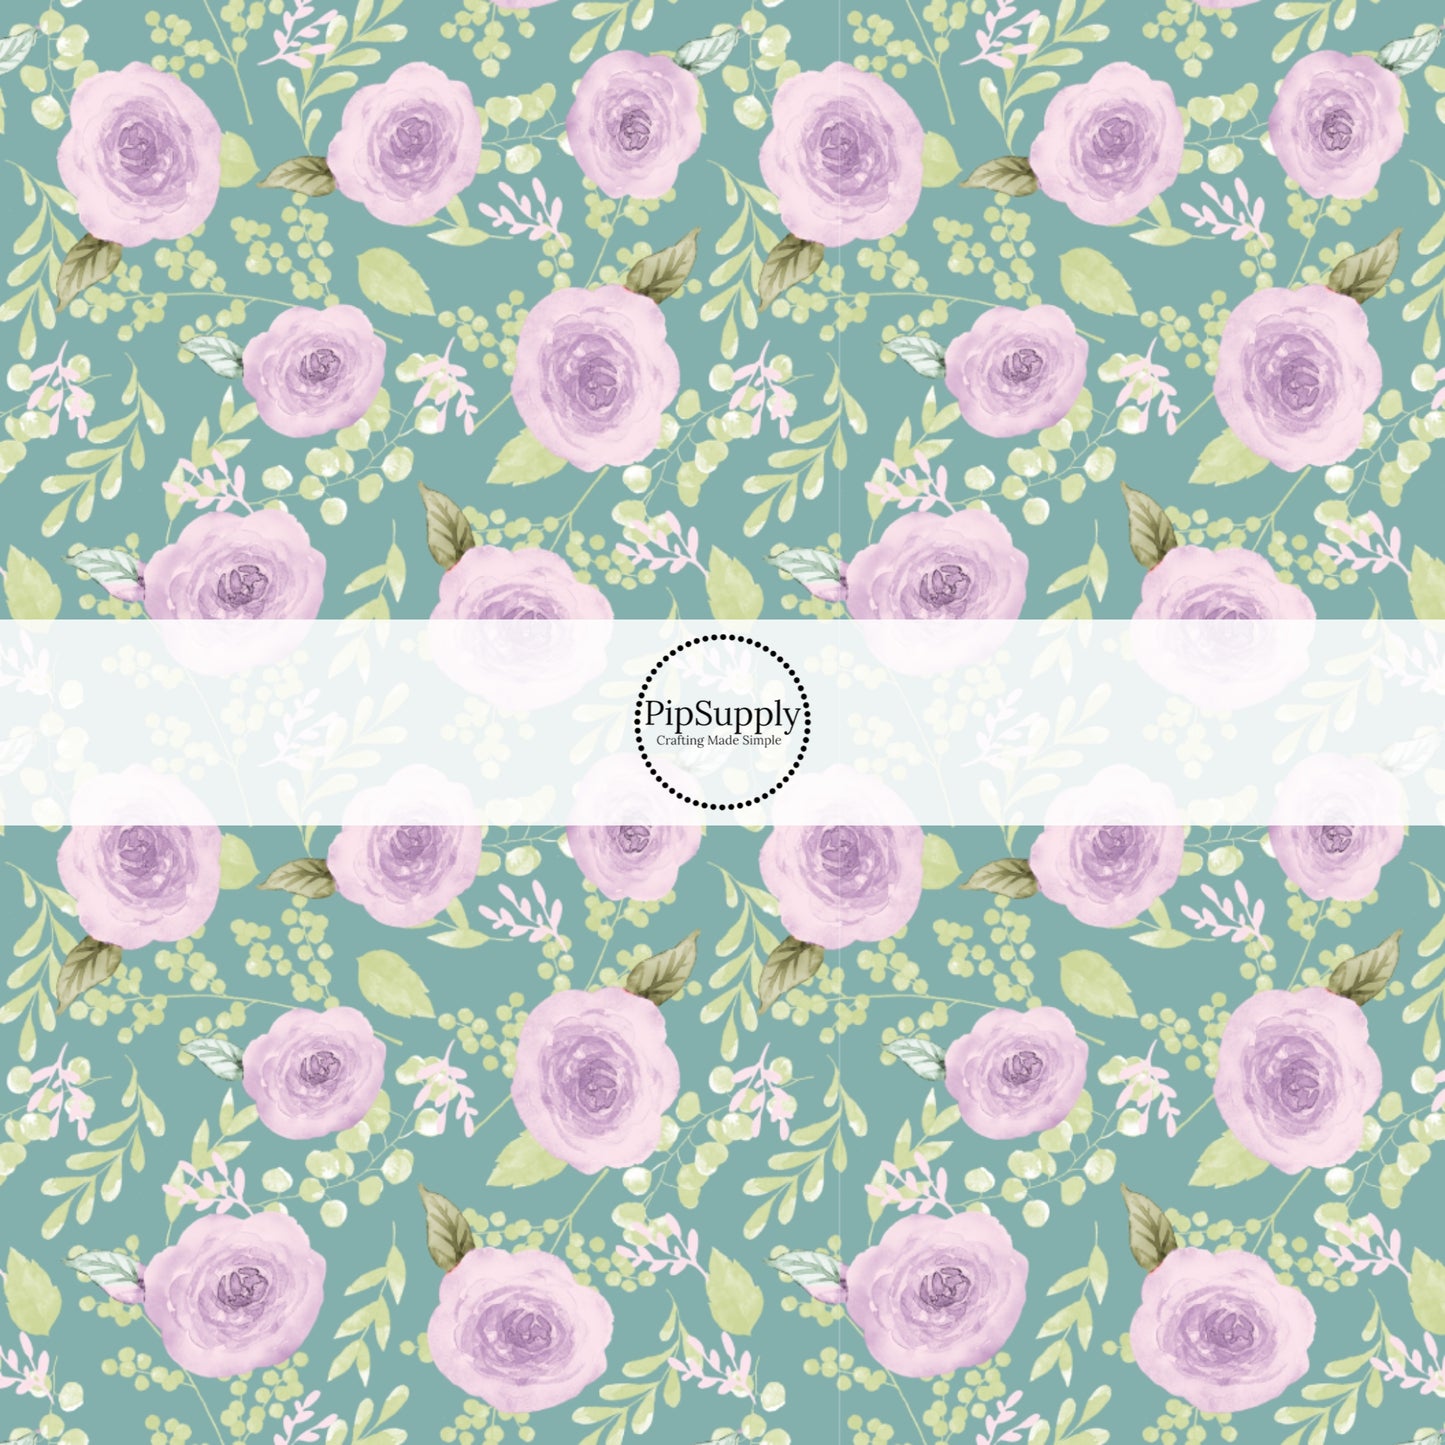 This summer fabric by the yard features purple roses on aqua. This fun summer themed fabric can be used for all your sewing and crafting needs!